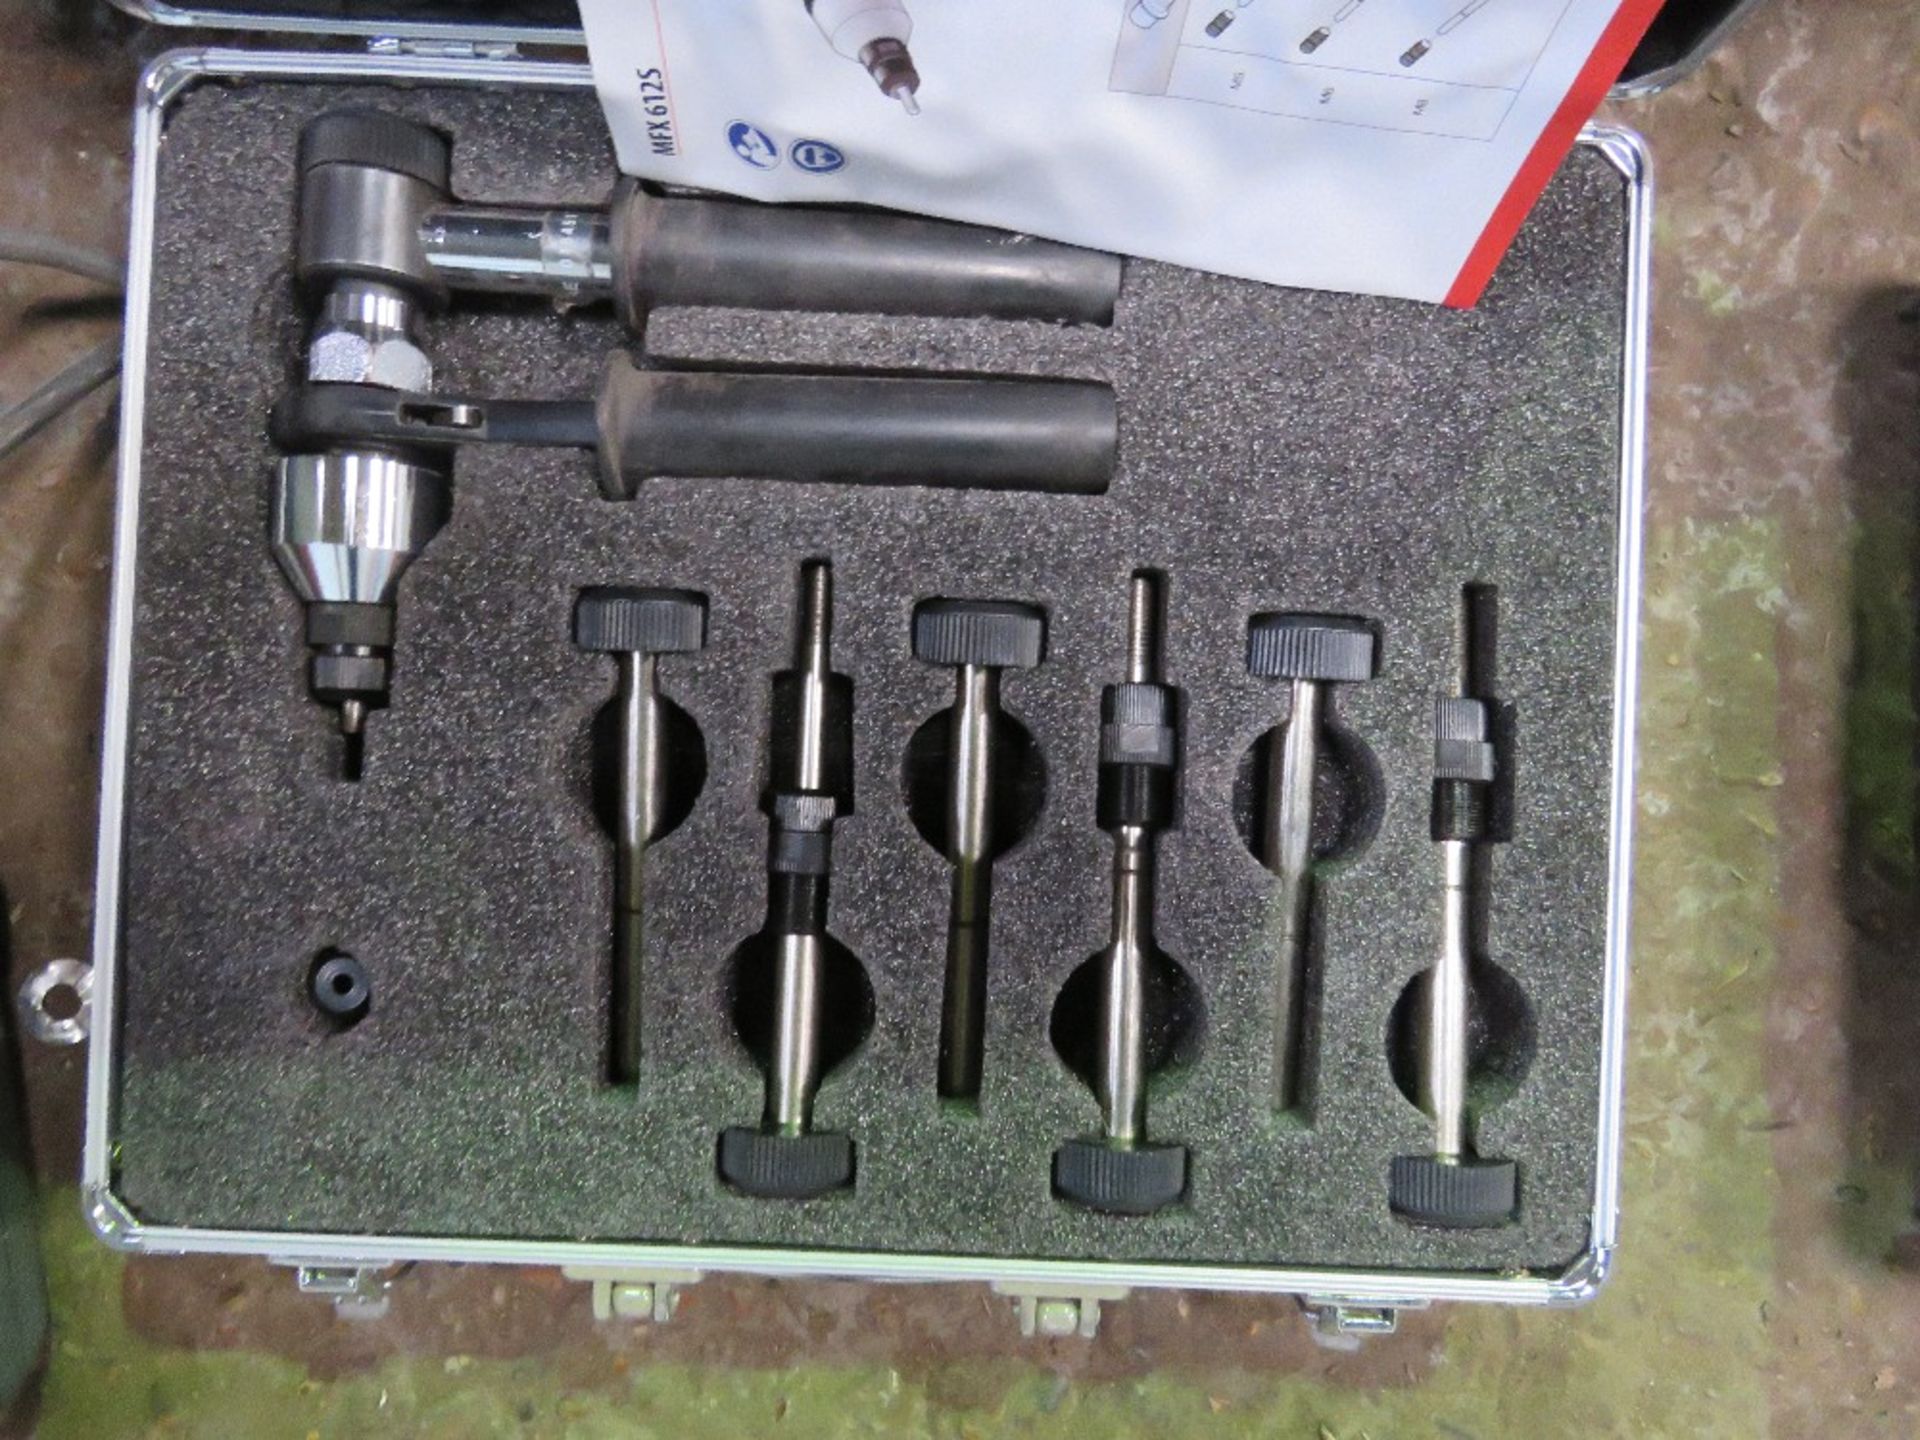 MASTERFIX MFX612 FIXING KIT IN A CASE. THIS LOT IS SOLD UNDER THE AUCTIONEERS MARGIN SCHEME, THEREFO